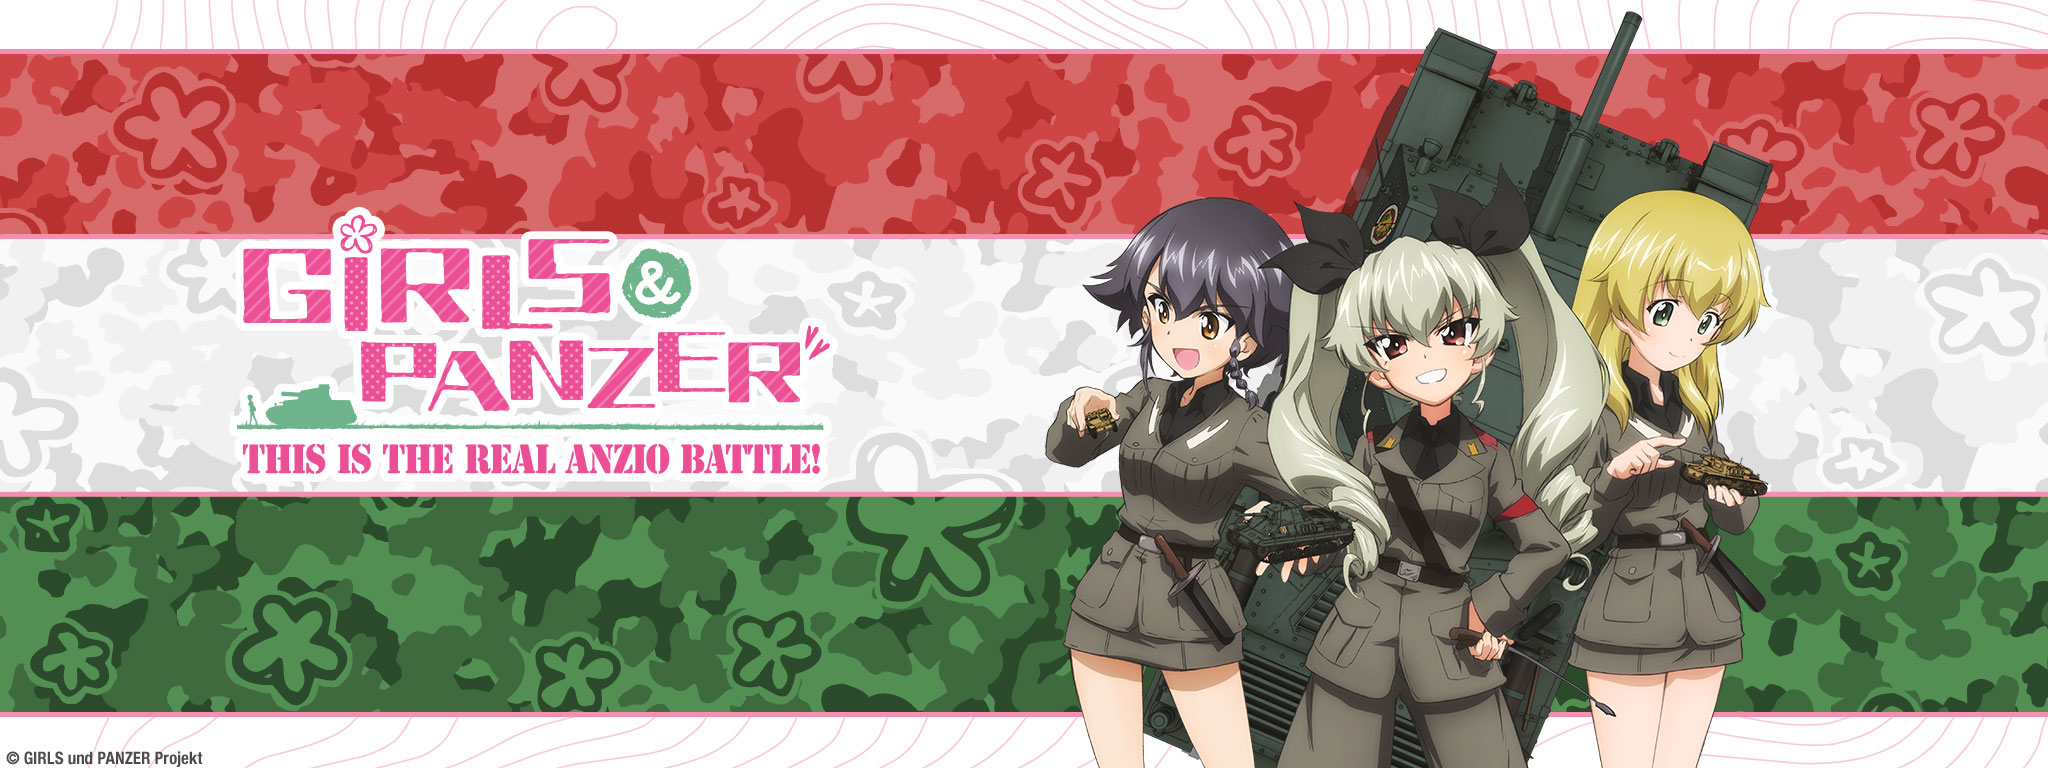 Title Art for Girls und Panzer: This is the Real Anzio Battle!